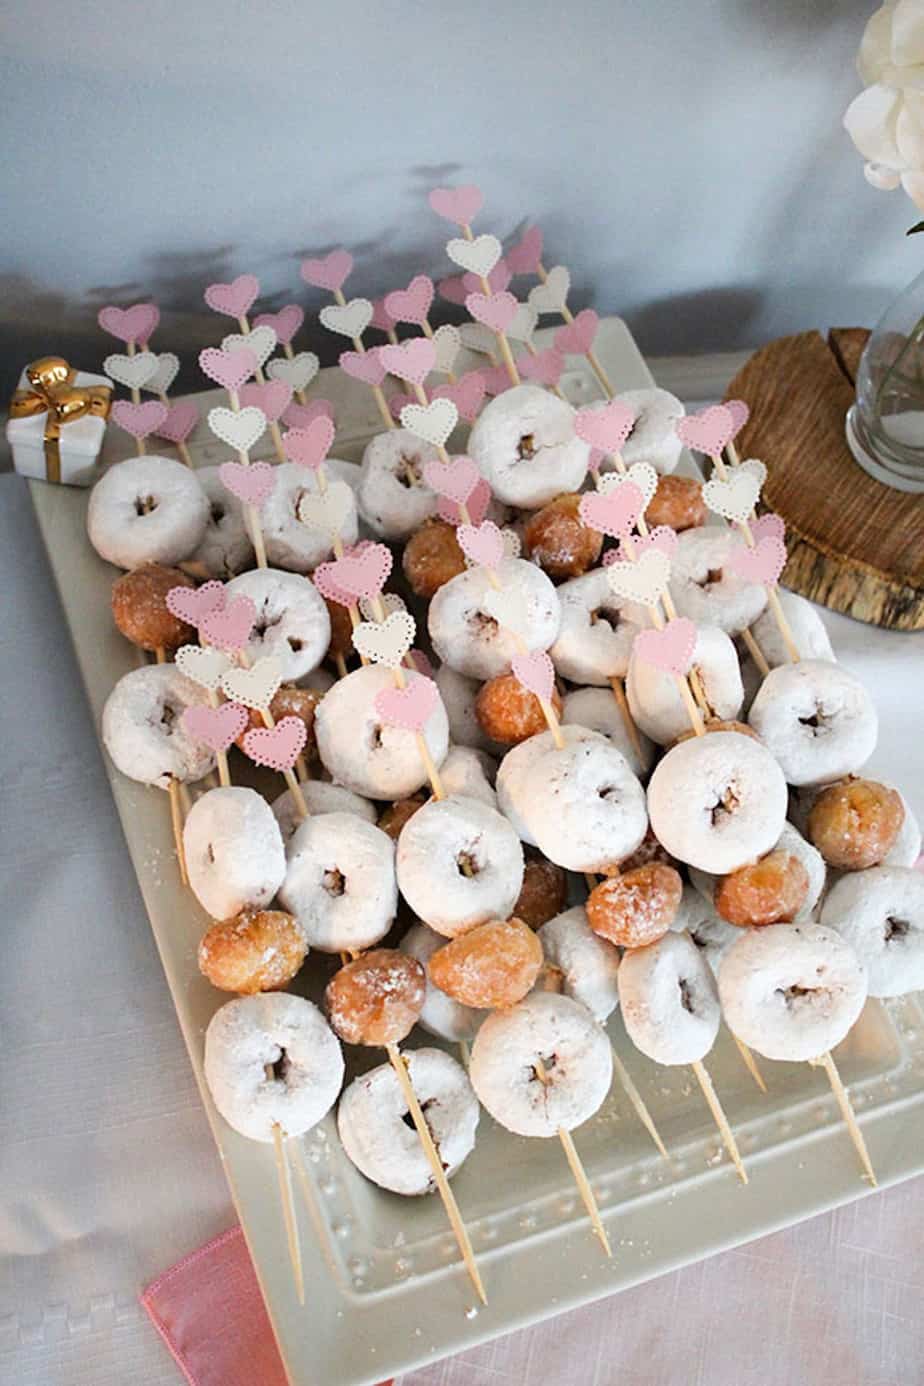 Mini donut and donut hole skewers with DIY pink and white hearts glued to the top.